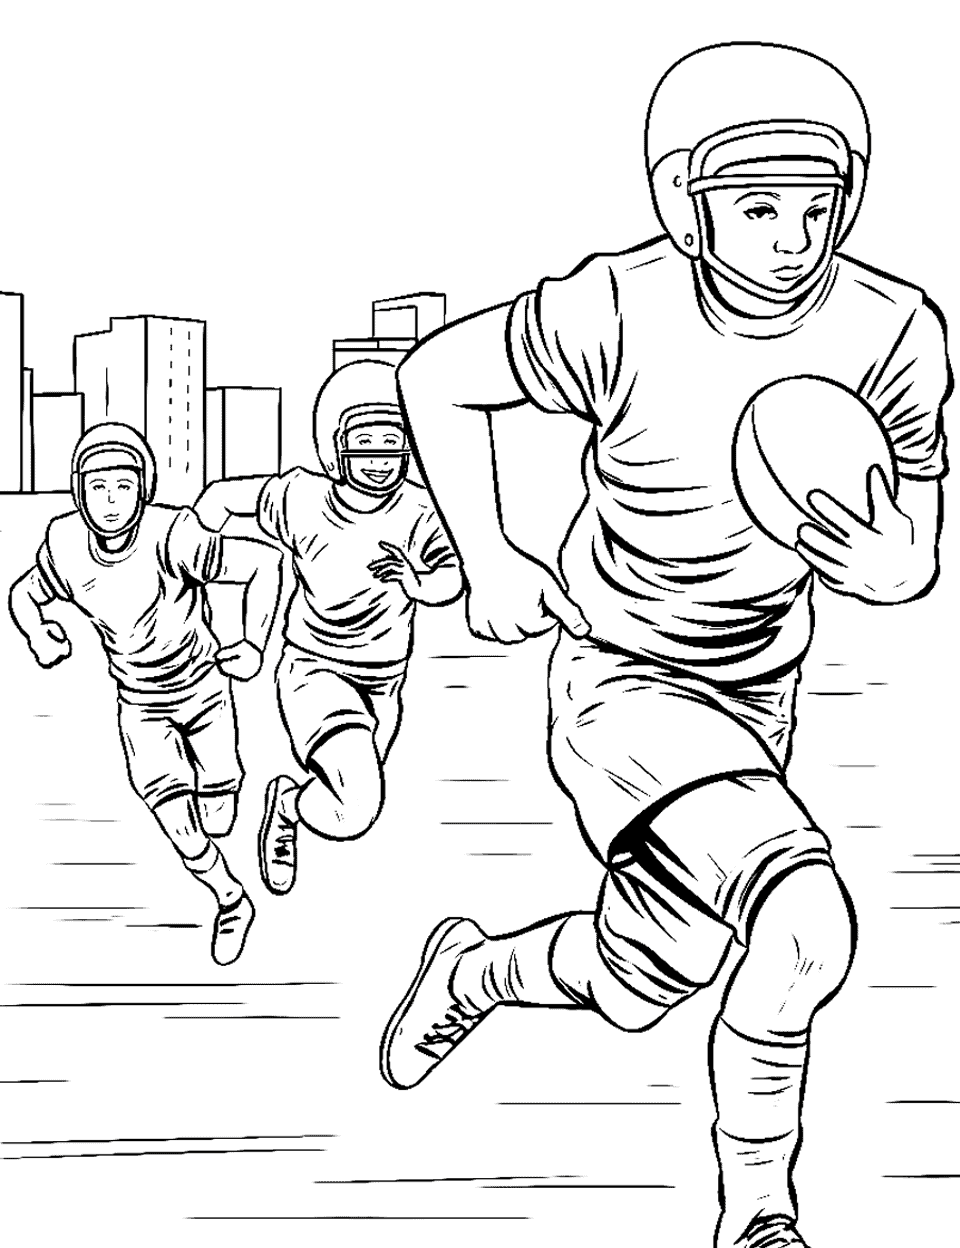 Youth Football Match Coloring Page - Young players engaged in a game of football on a sunny day.